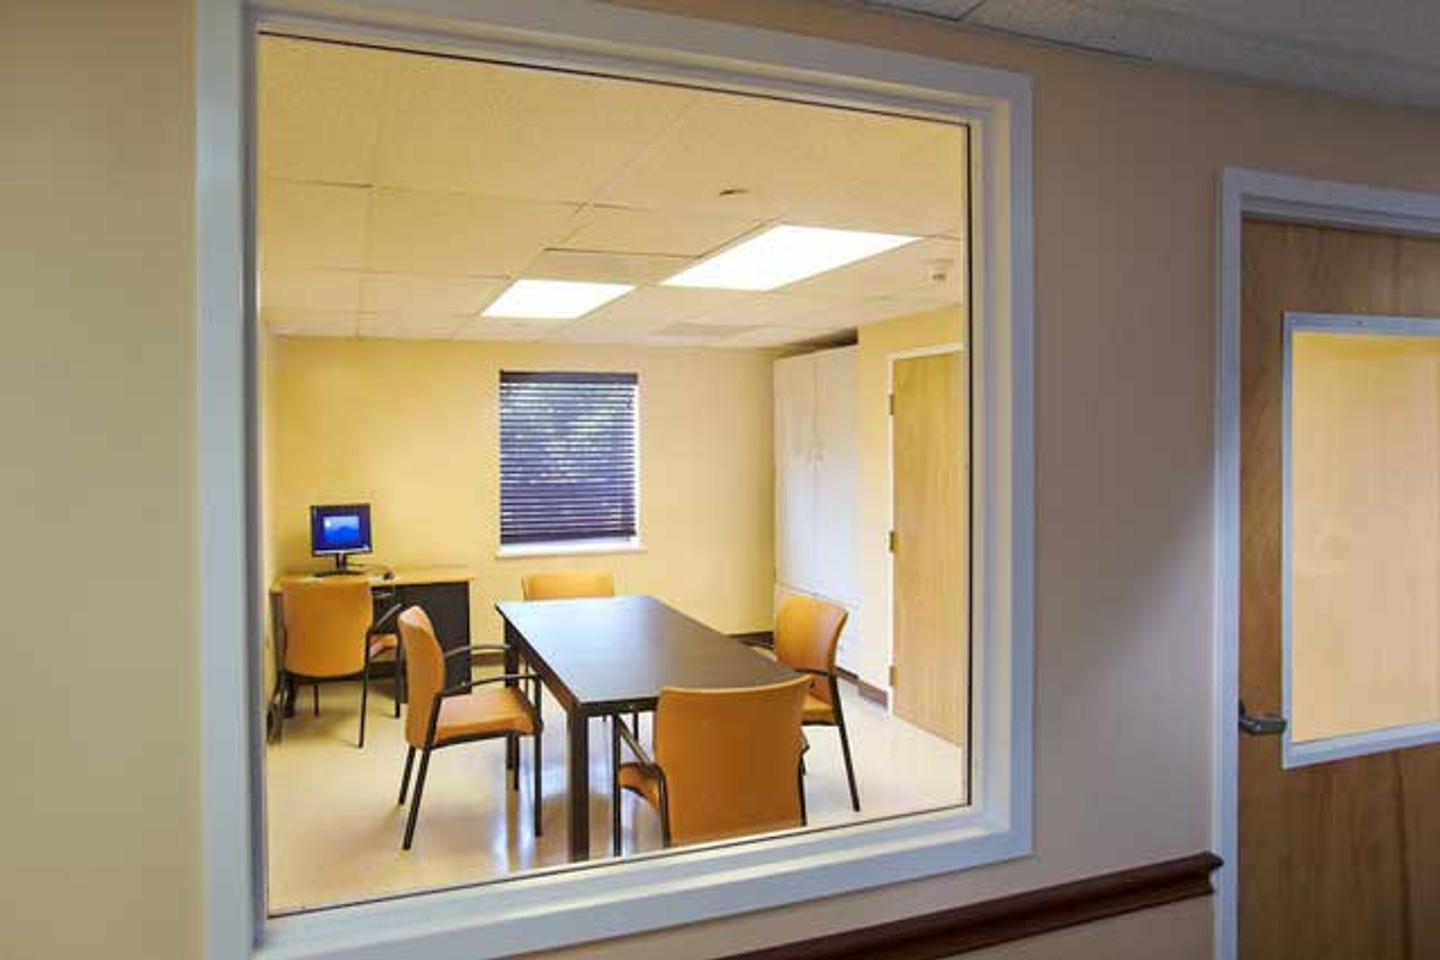 Looking into the study room window from the hallway at Reflections Eating Disorder Treatment Center